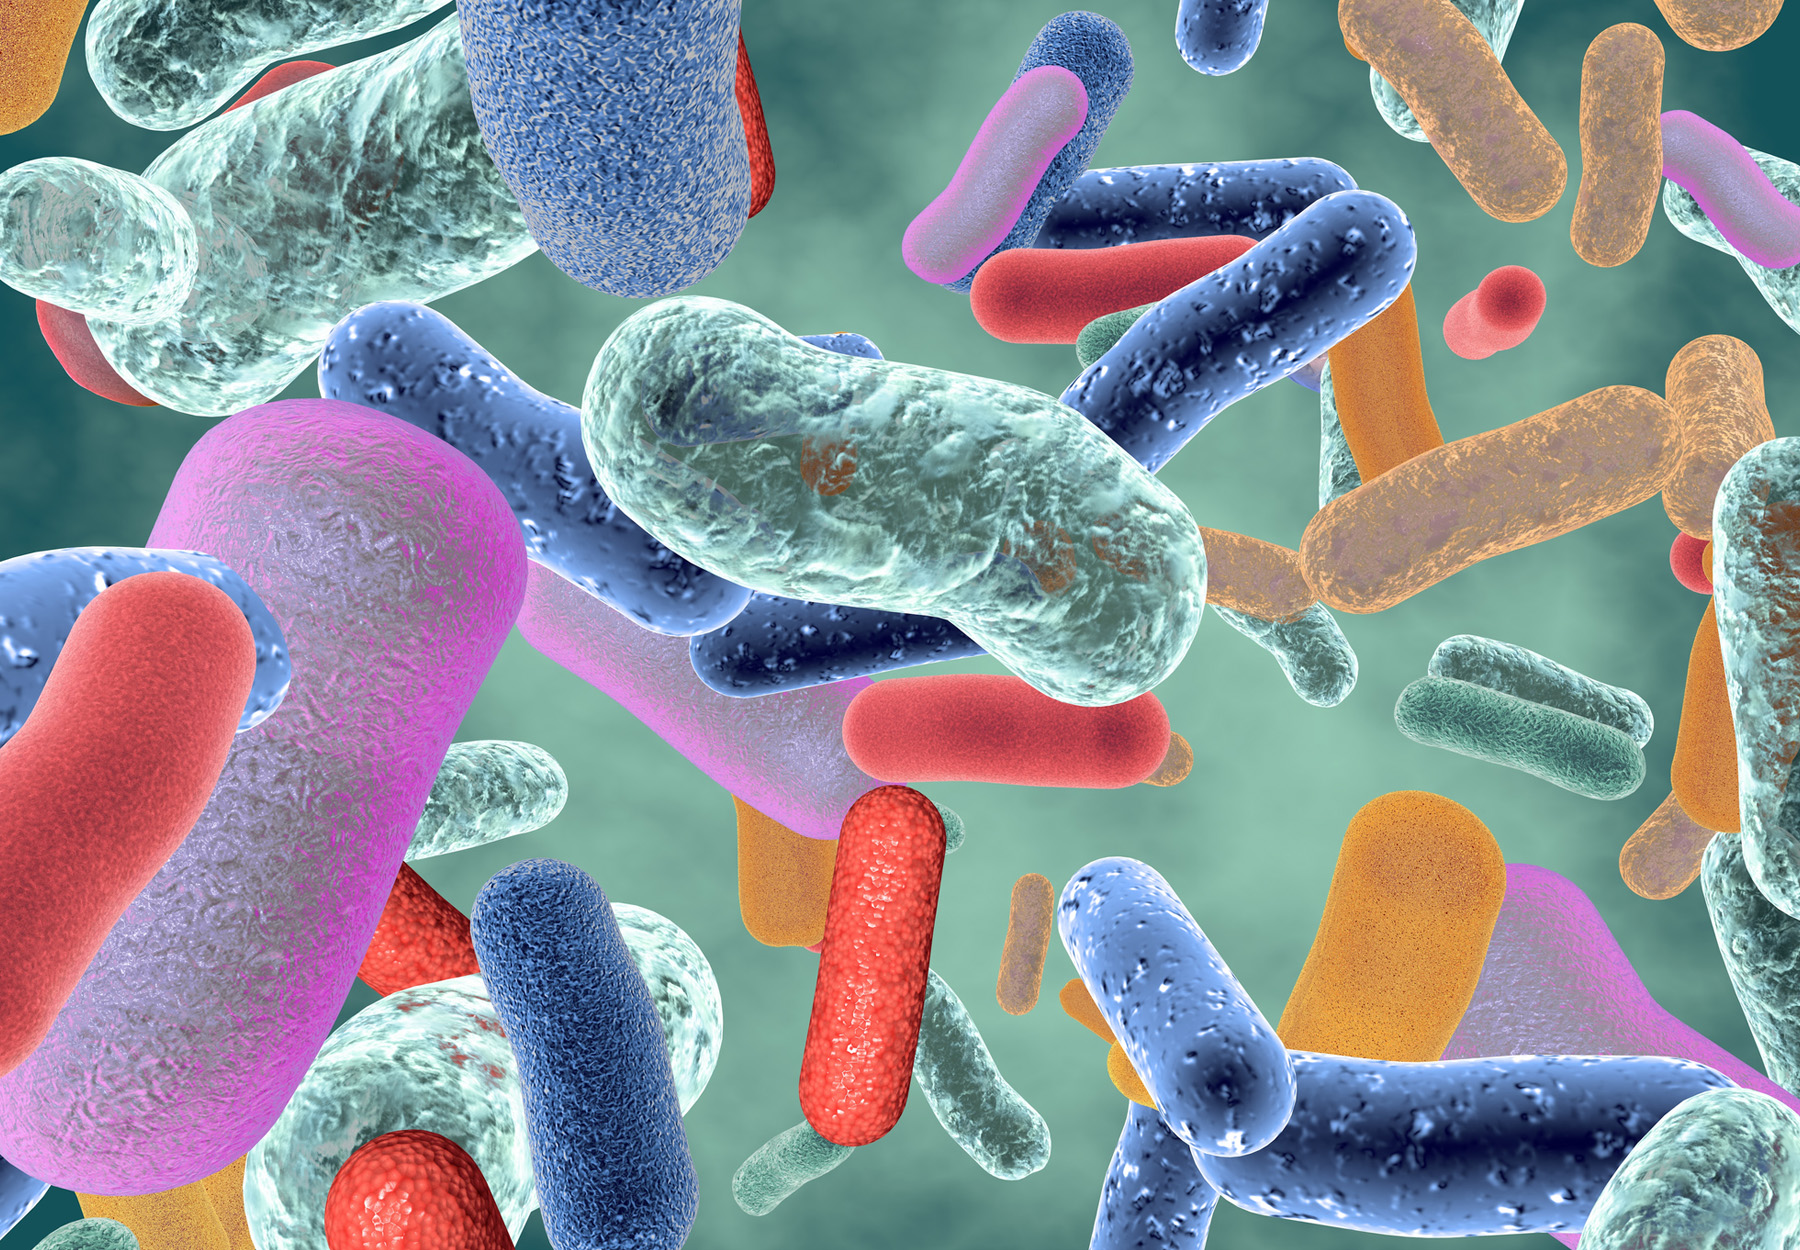 An illustration of colorful gut bacteria.